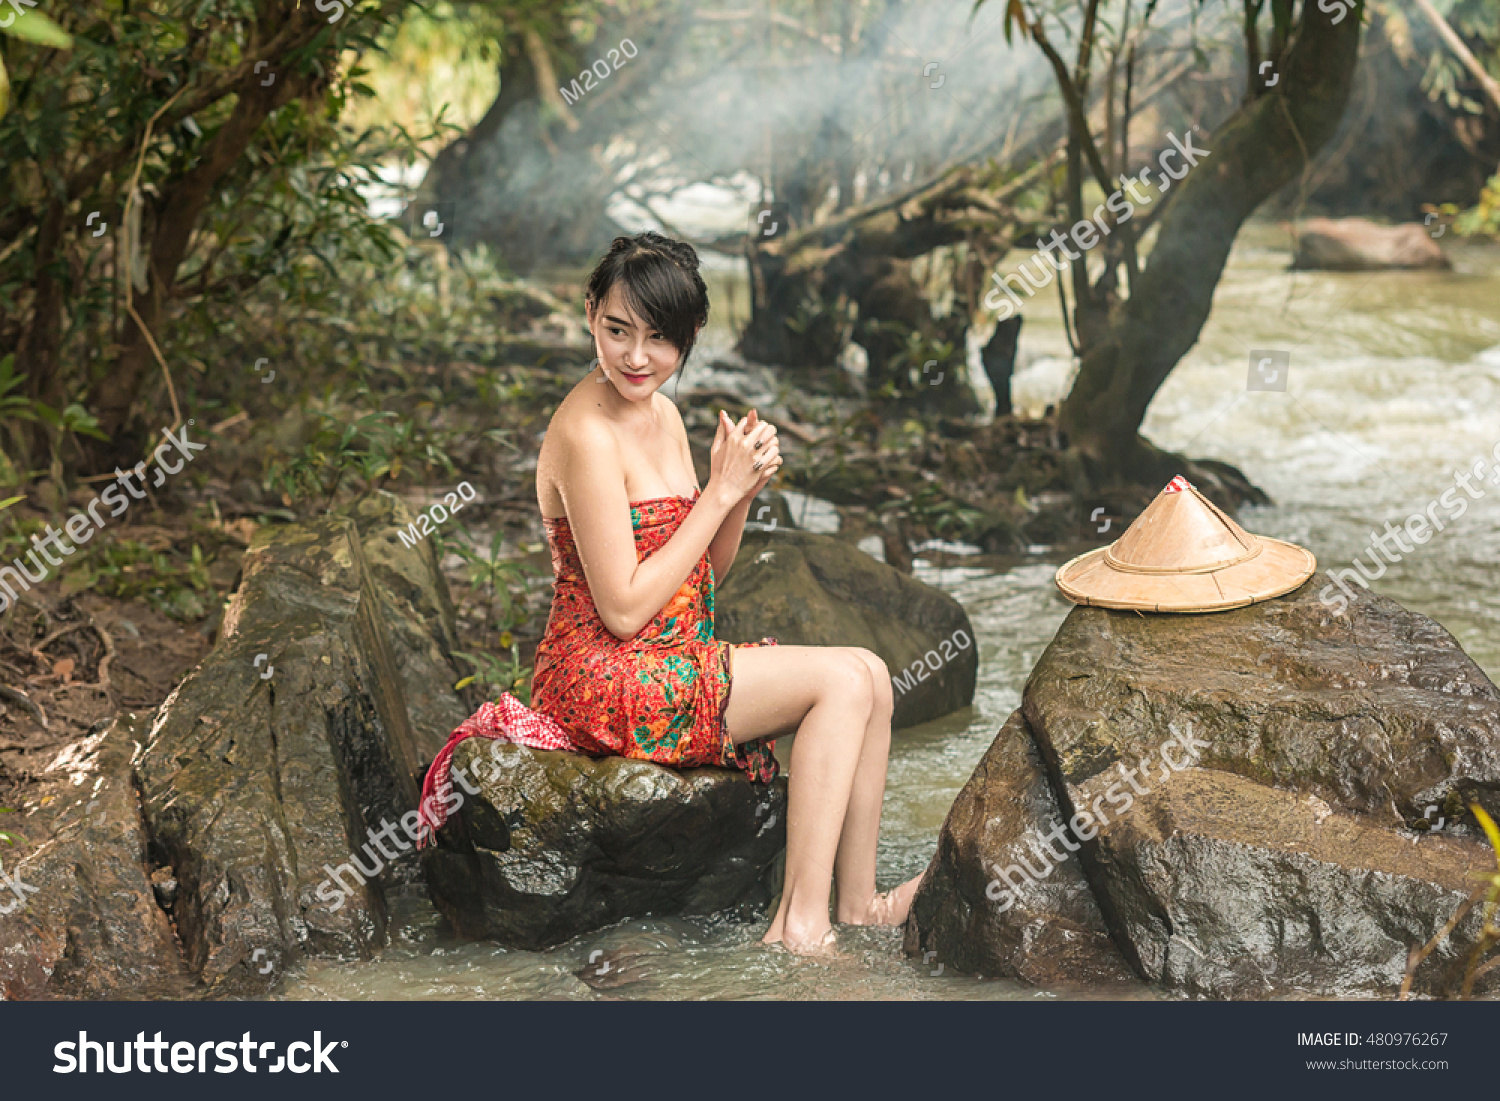 Asian Women Bathing At Outdoors Stock Image - Image of 